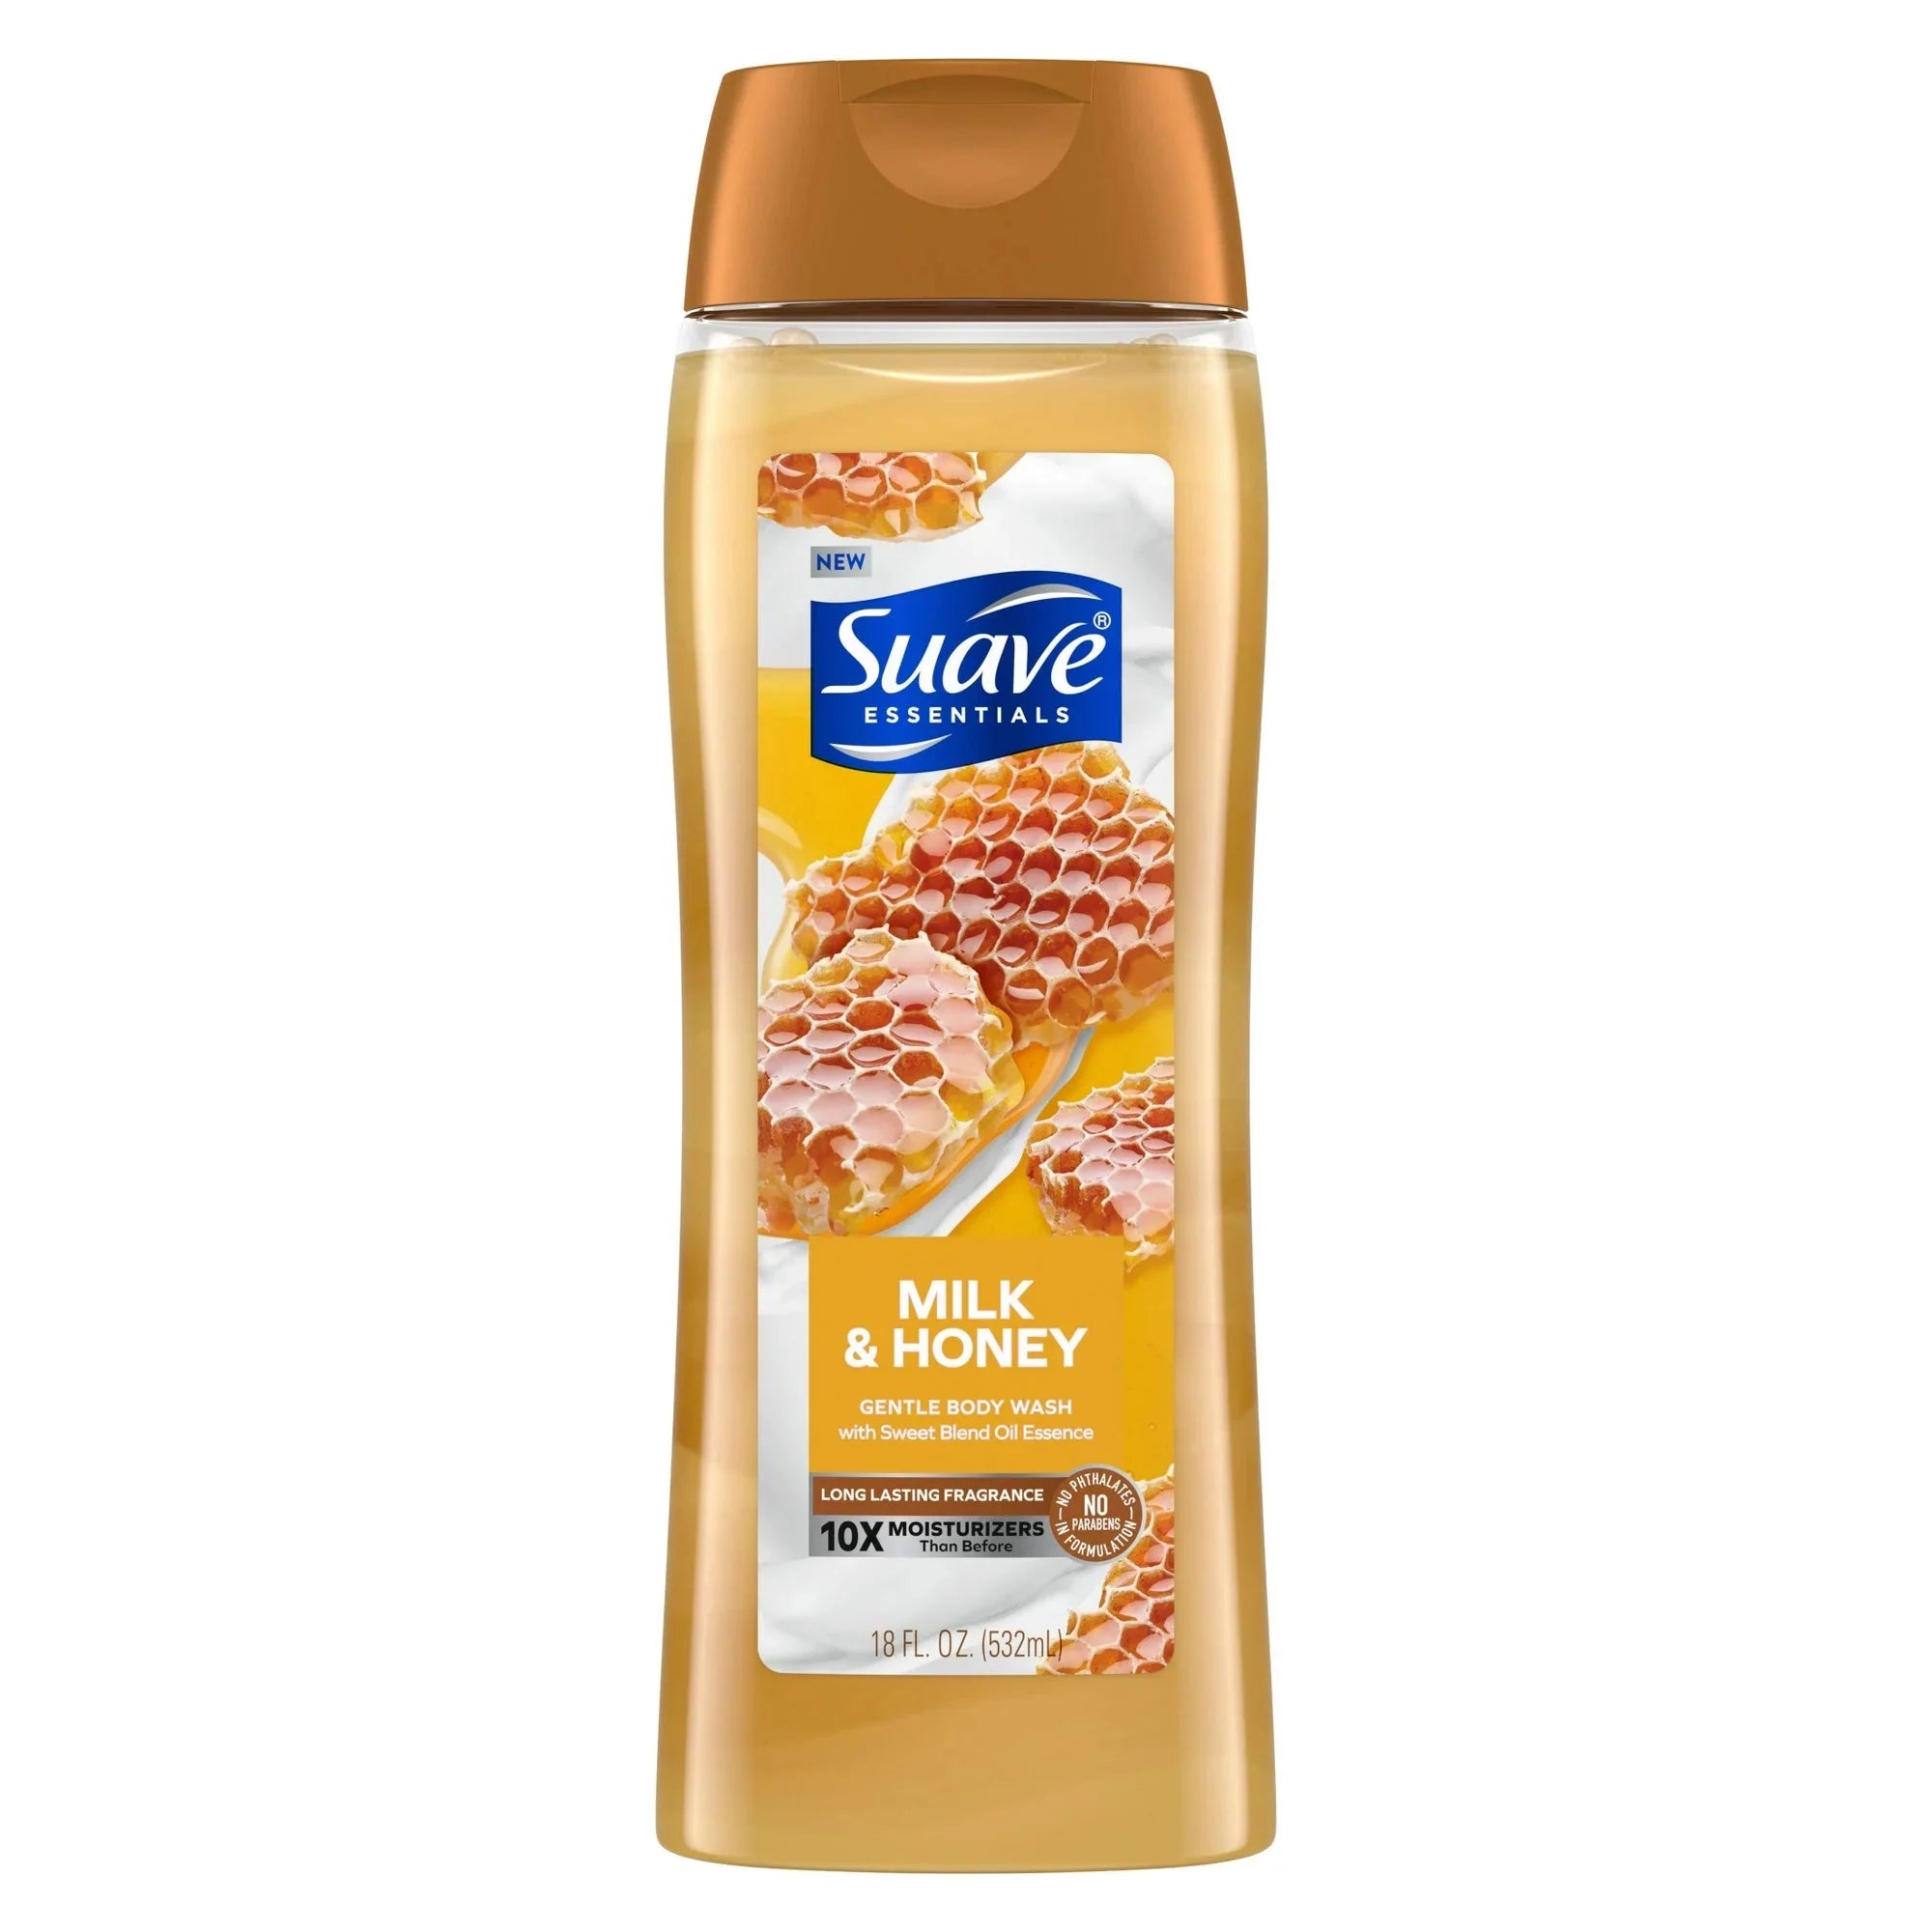 Wholesale prices with free shipping all over United States Suave Essentials Gentle Body Wash, Milk & Honey, 18 oz - Steven Deals